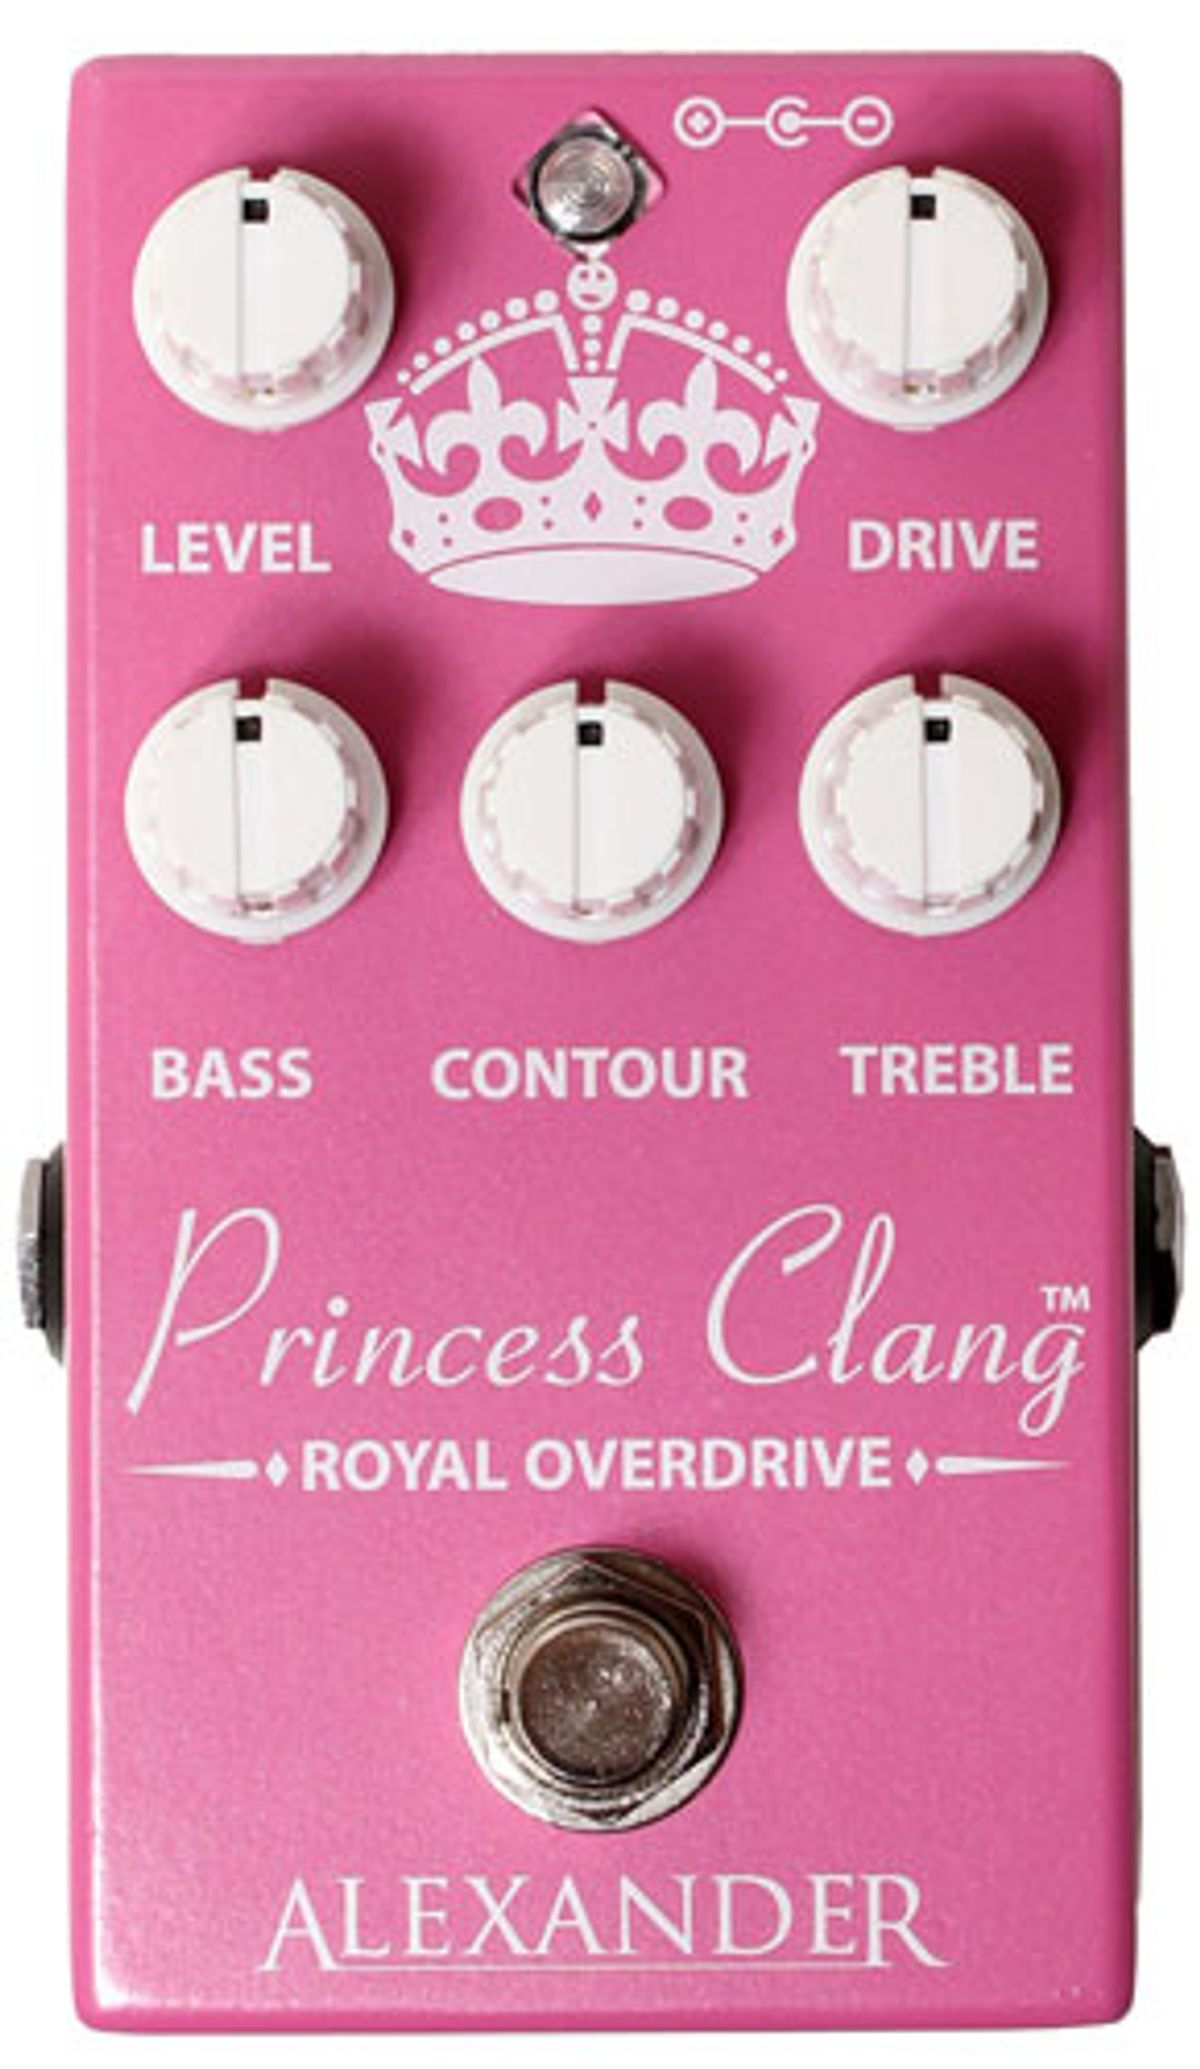 Alexander Pedals Releases the Princess Clang Royal Overdrive